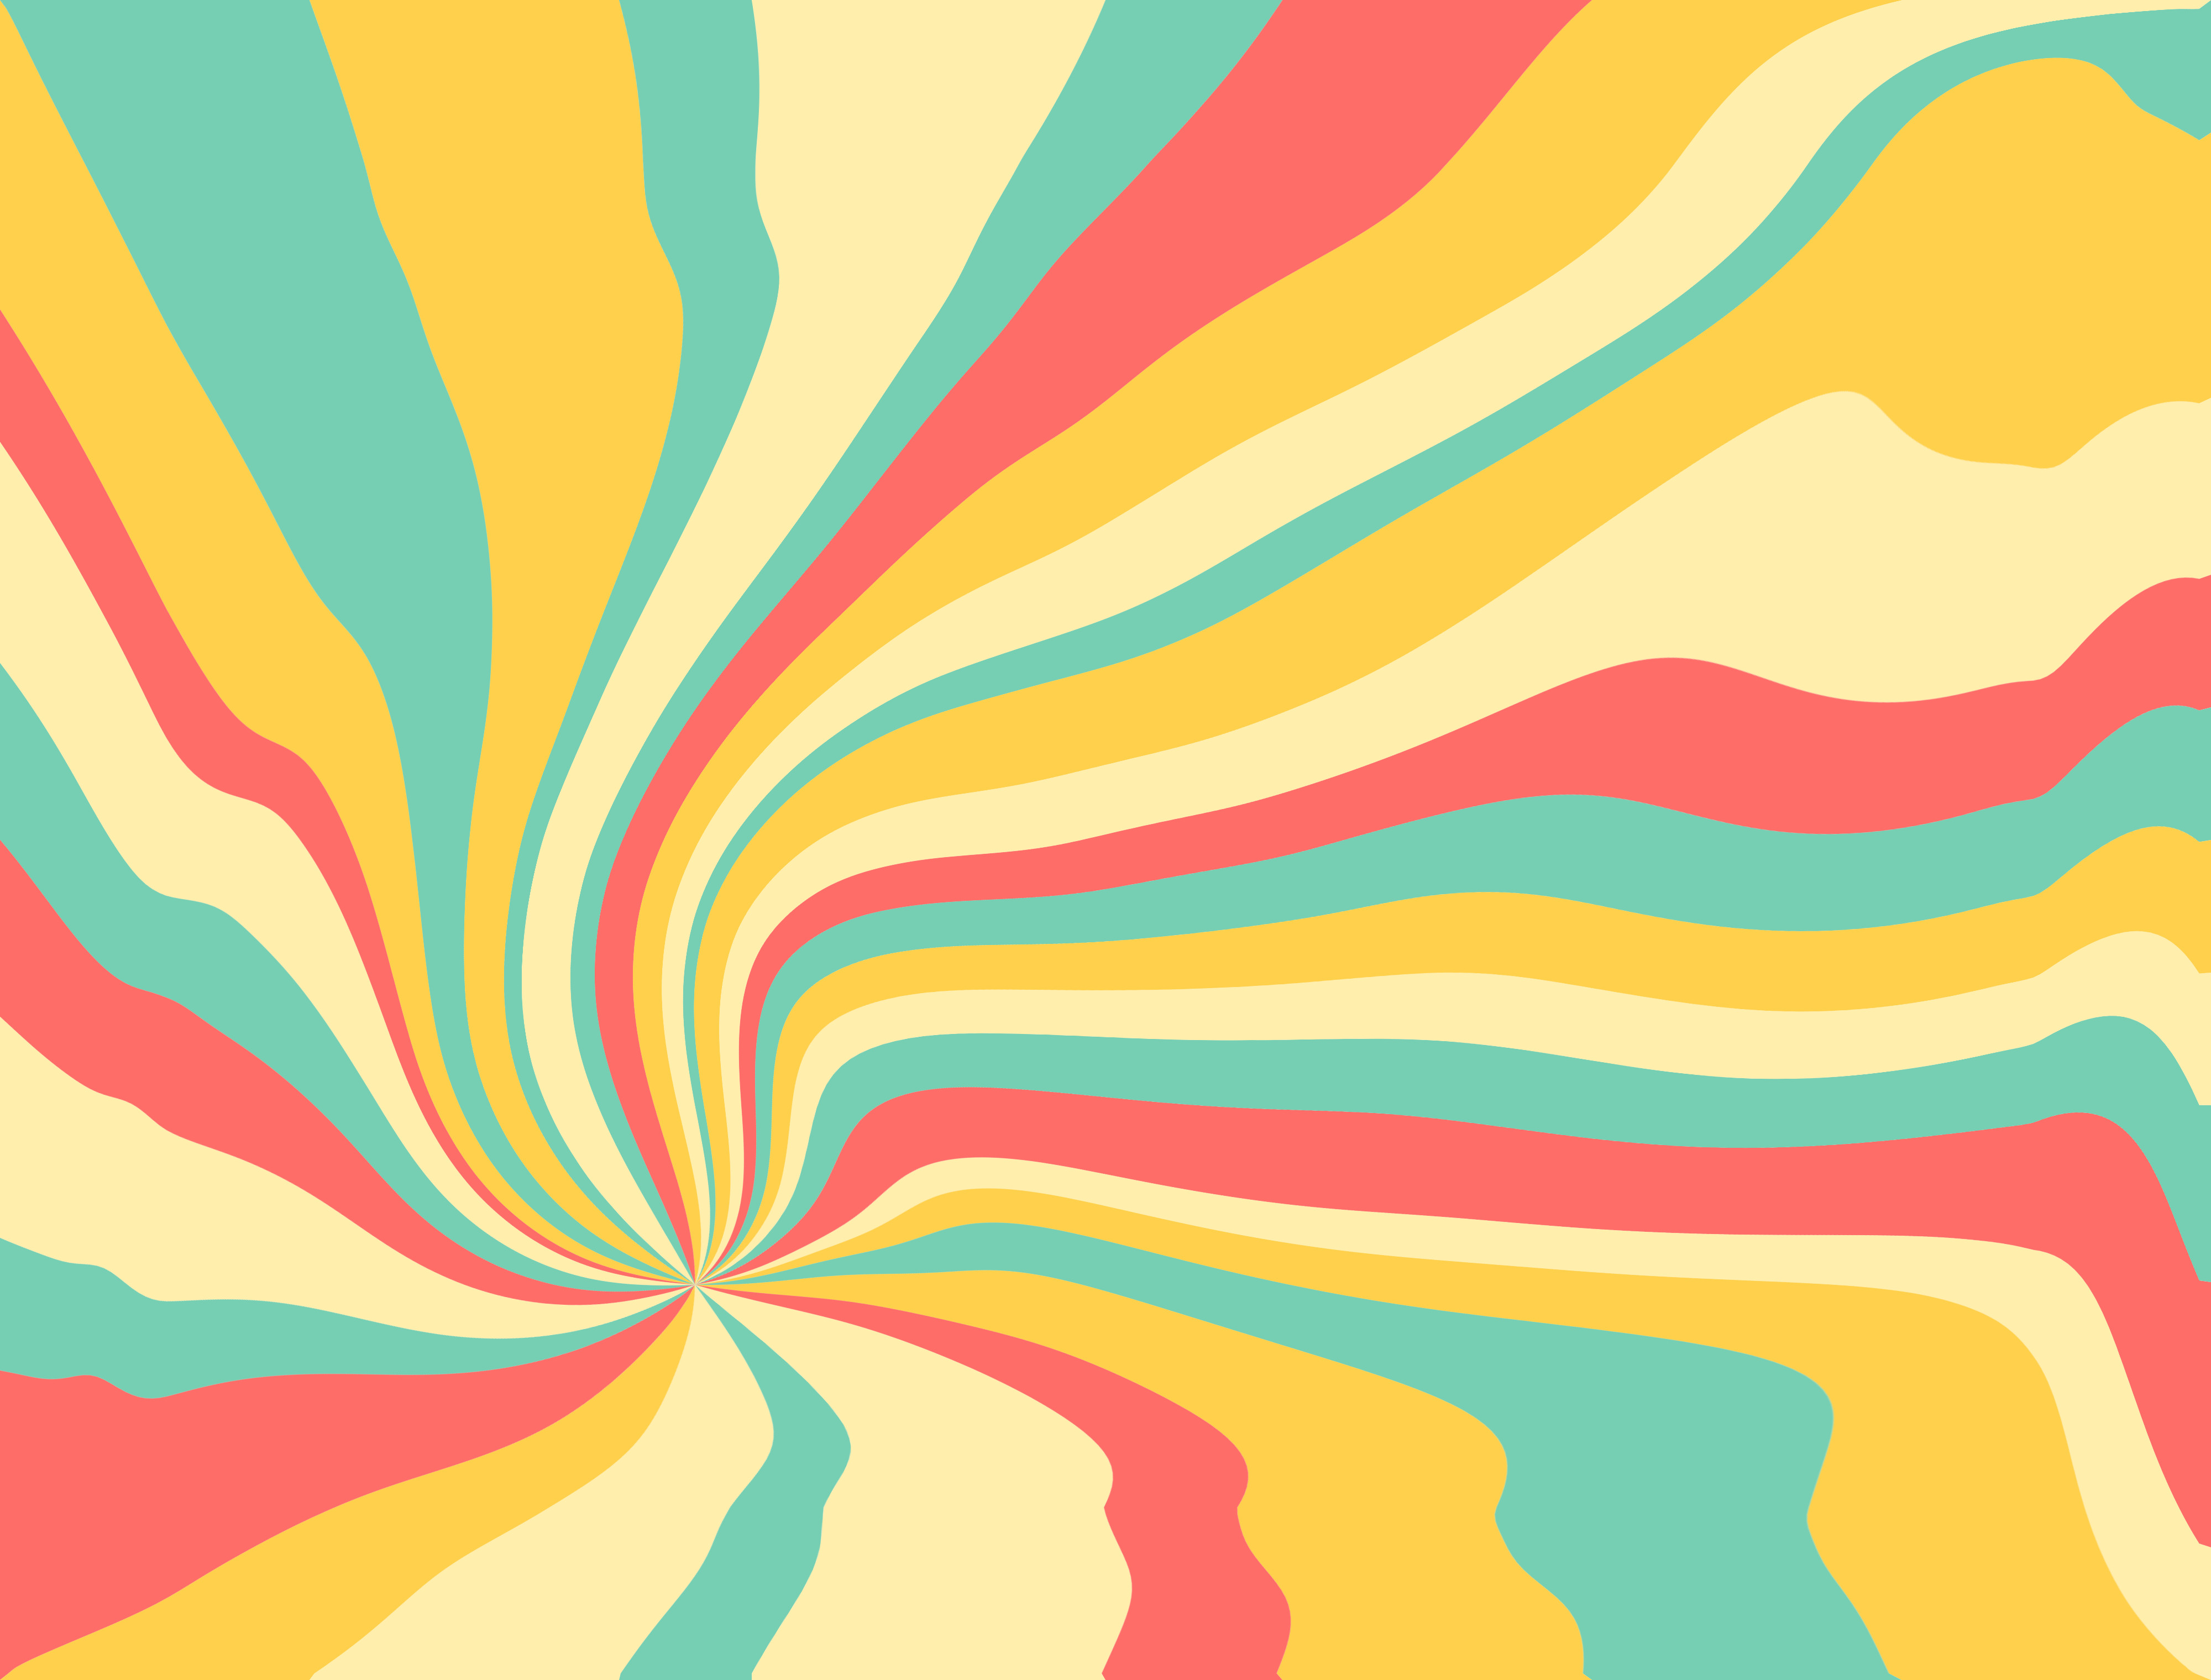 Psychedelic Groovy Background in Vivid Colors (JPG) .